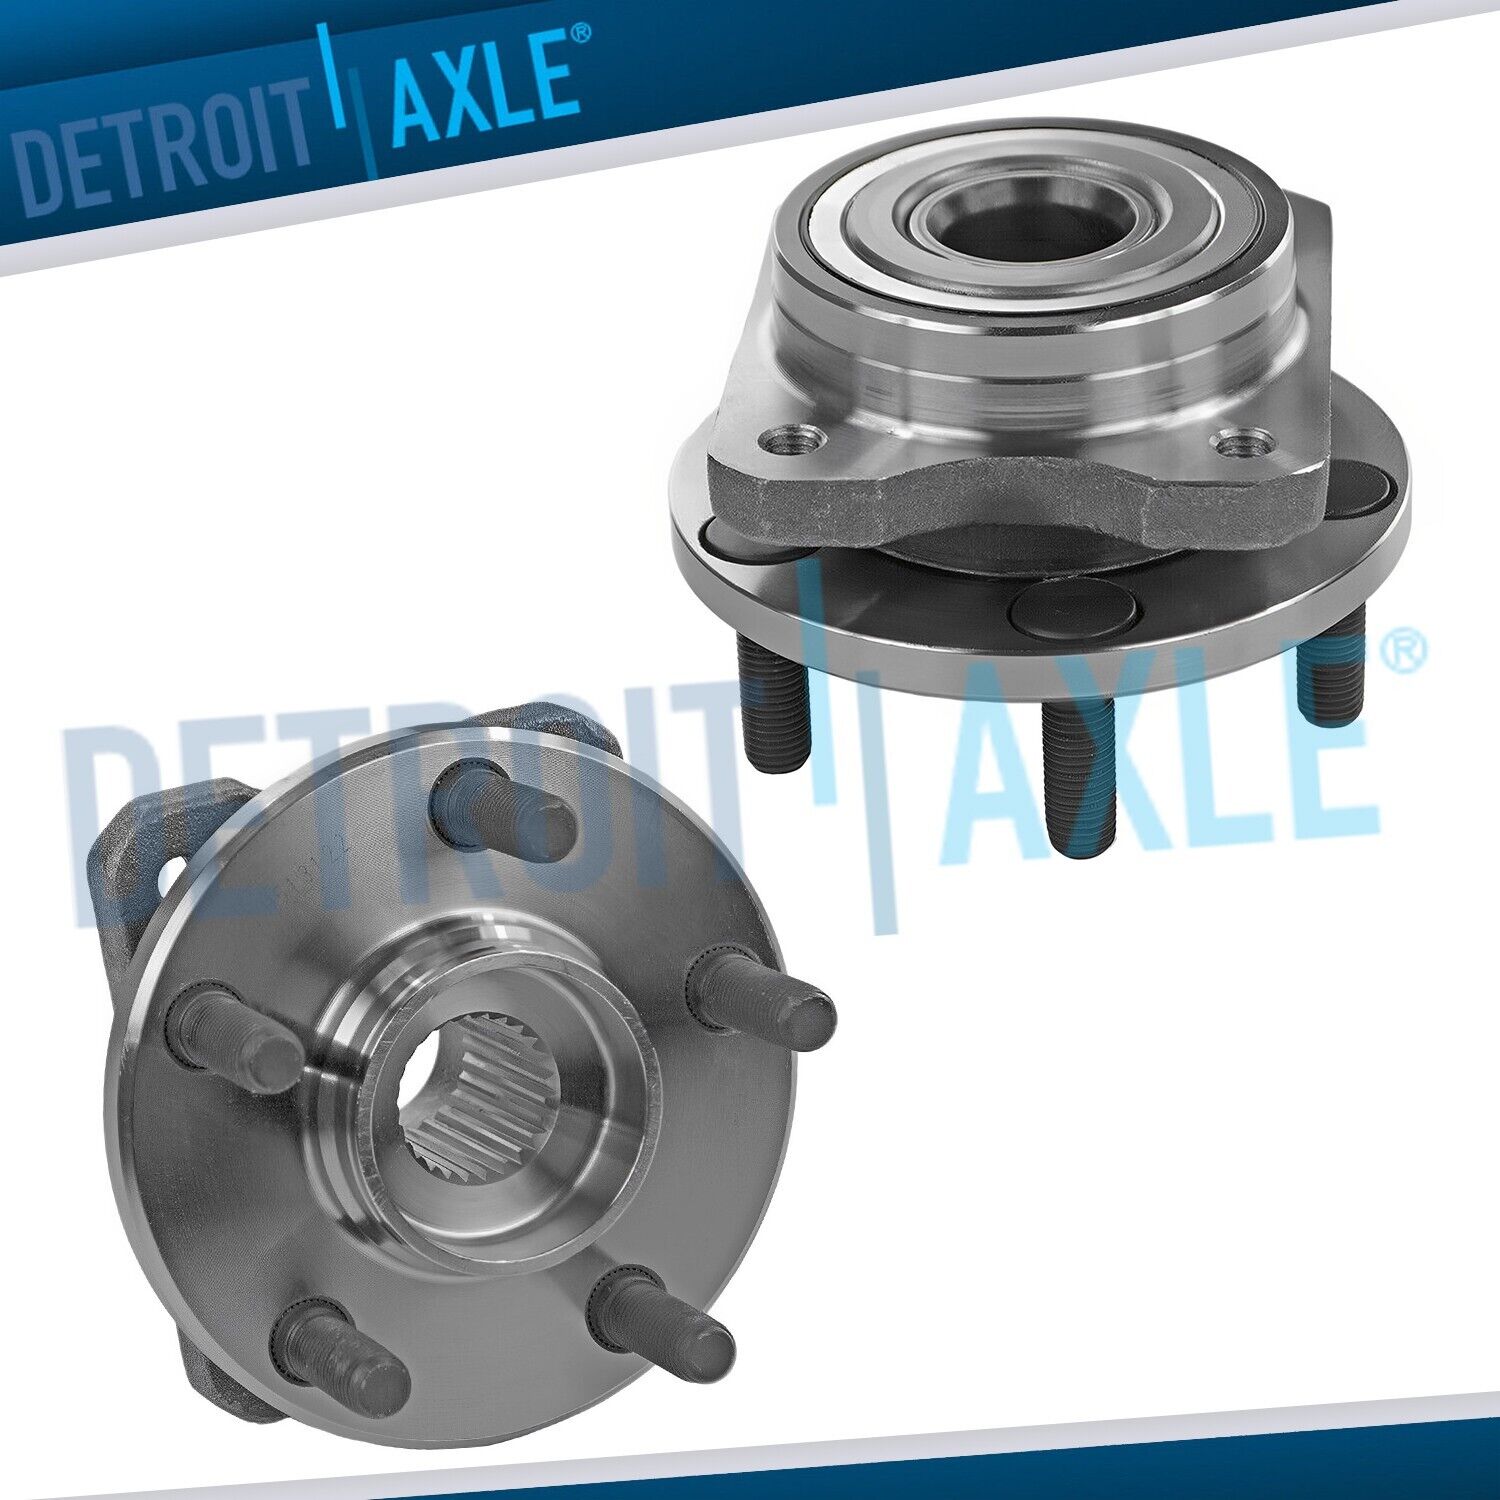 Front wheel hub and bearing for 1996-2000 Voyager Town and Country Grand Caravan